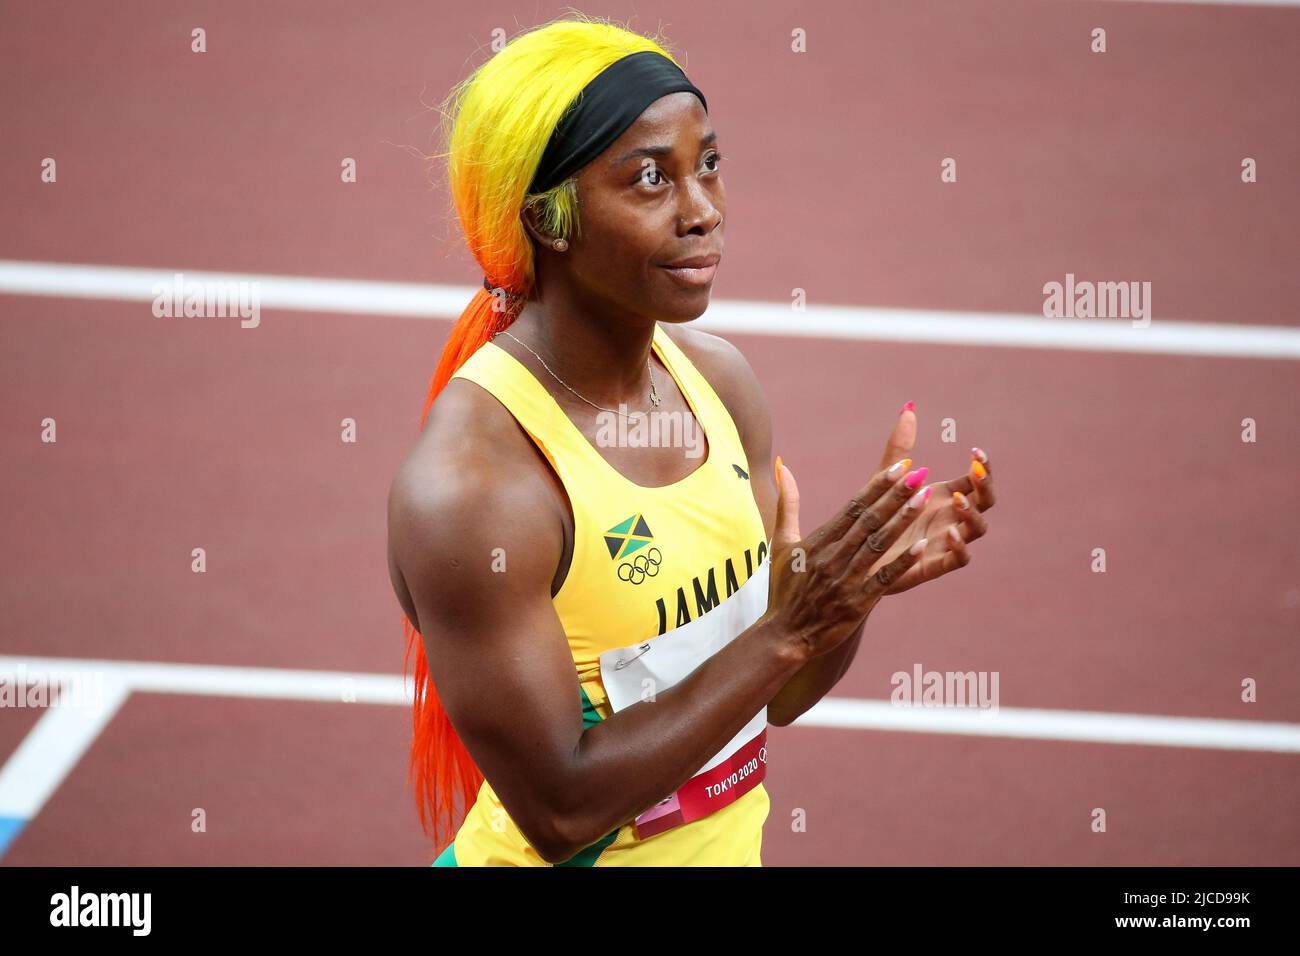 JULY 31st, 2021 - TOKYO, JAPAN: Shelly-Ann Fraser-Pryce of Jamaica wins the Women's 100m Semi-Final 3 in 10.76 at the Tokyo 2020 Olympic Games (Photo: Stock Photo